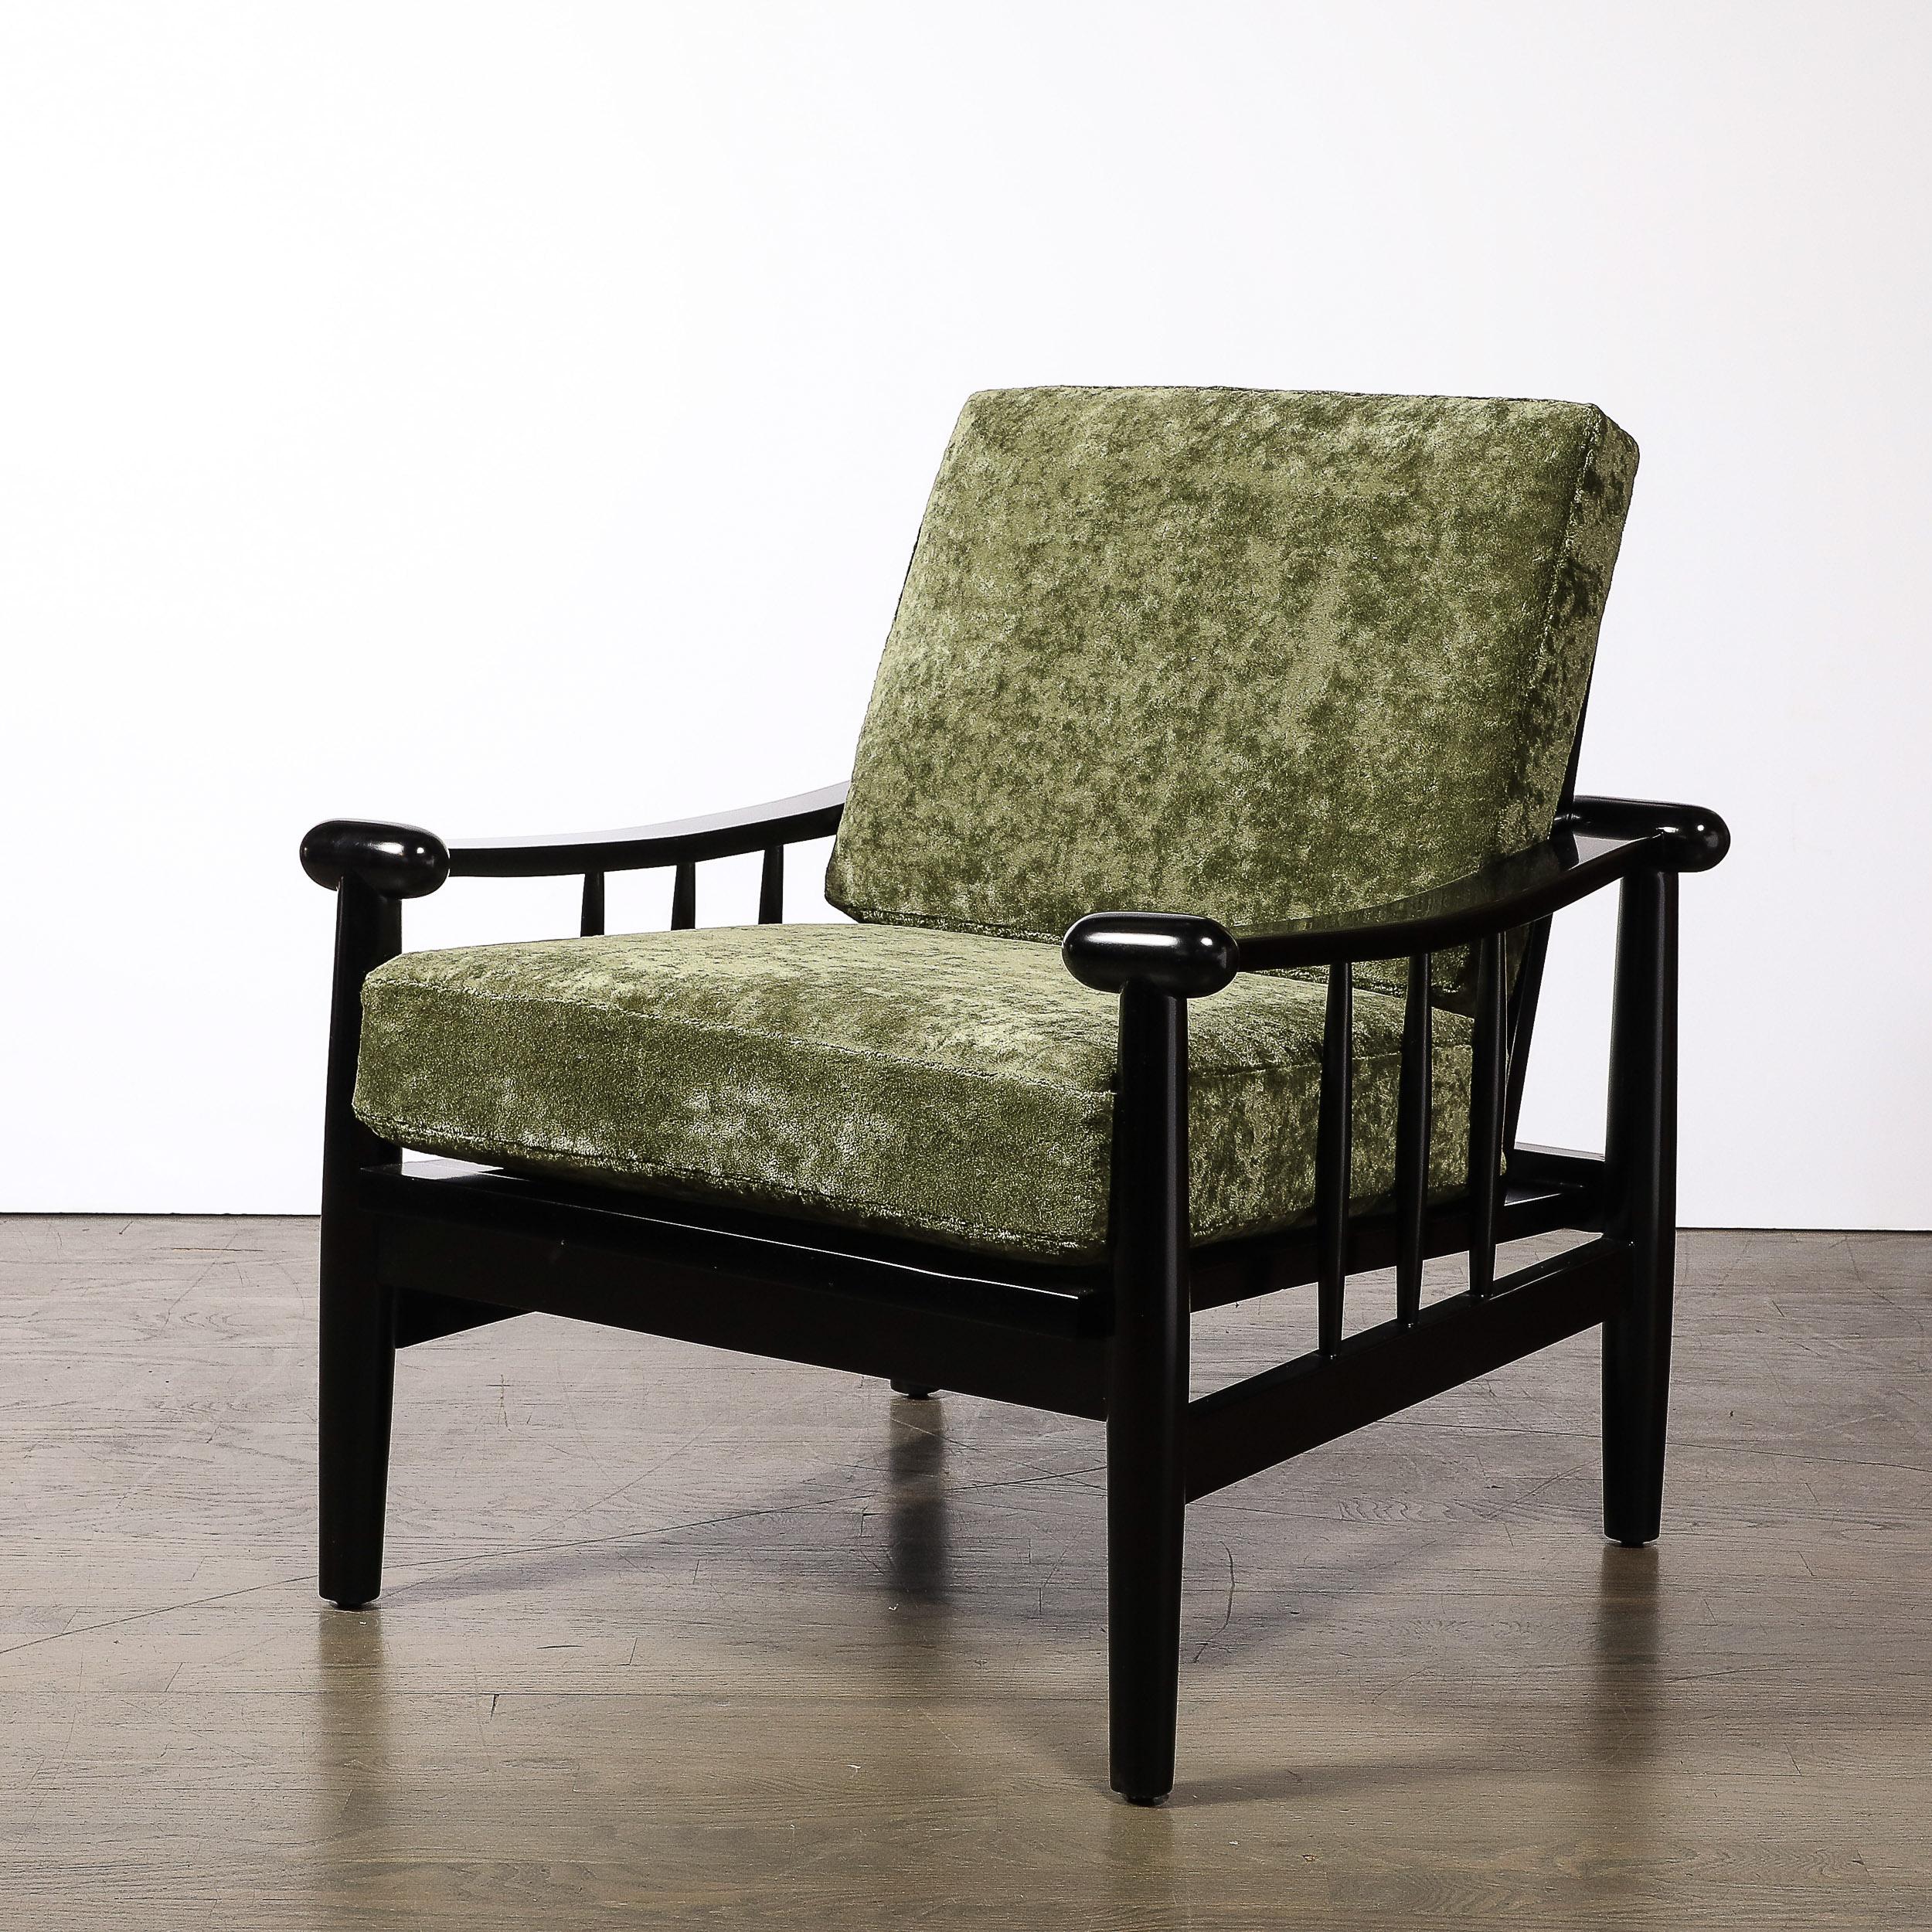 French Mid-Century Sculptural Ebonized Walnut & Green Fabric Rounded Pommel Club Chairs For Sale